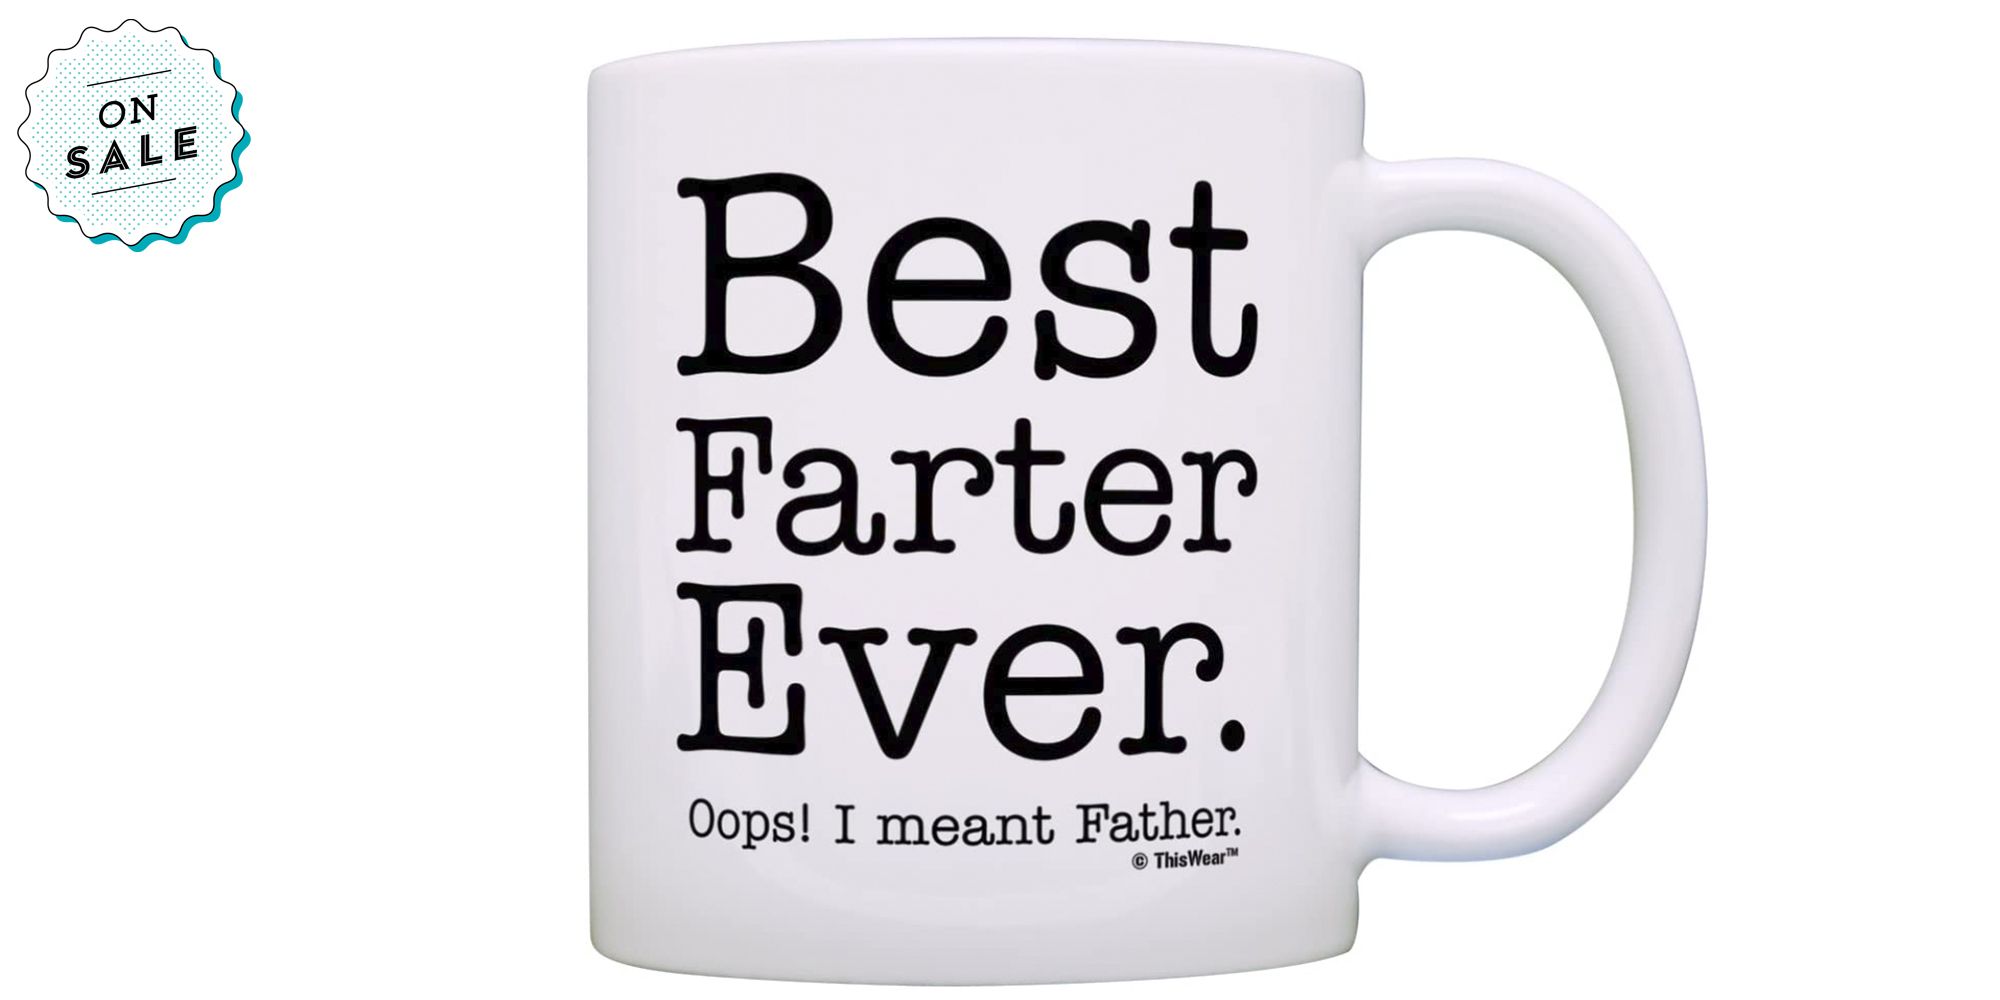 Dad Joke Can Cooler  World's Greatest Farter World's Greatest Father  Father's Day Gift  Dad gift  Husband gift  Customize